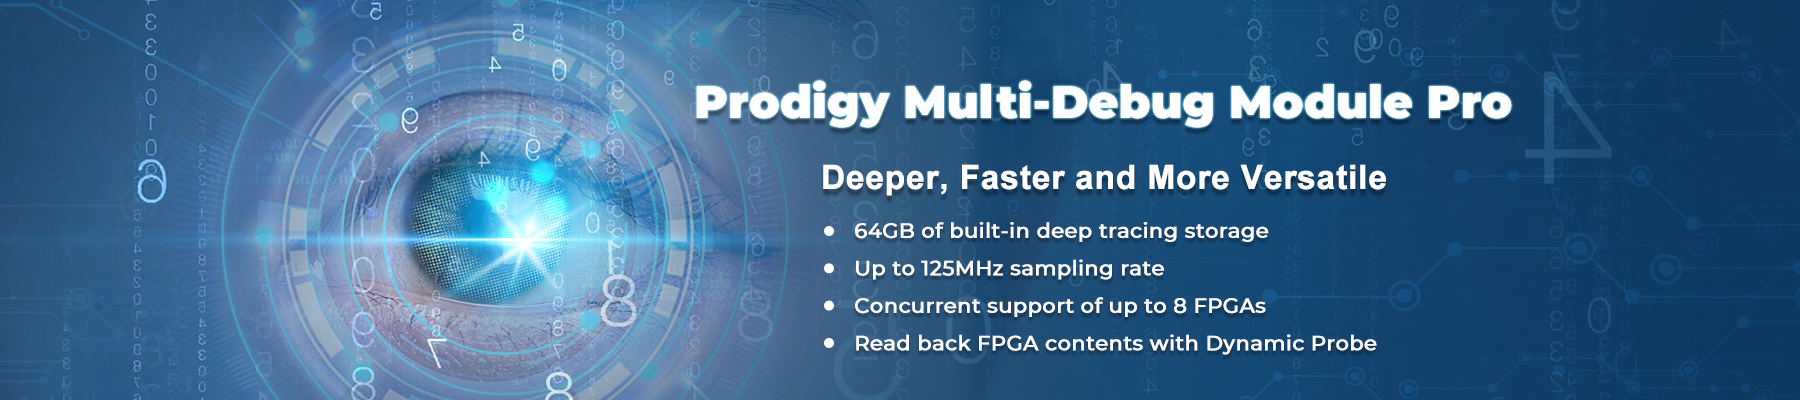 s2c-announces-next-gen-prodigy-mdm-pro-to-simplify-and-speed-up-fpga-prototyping-debug-process.png